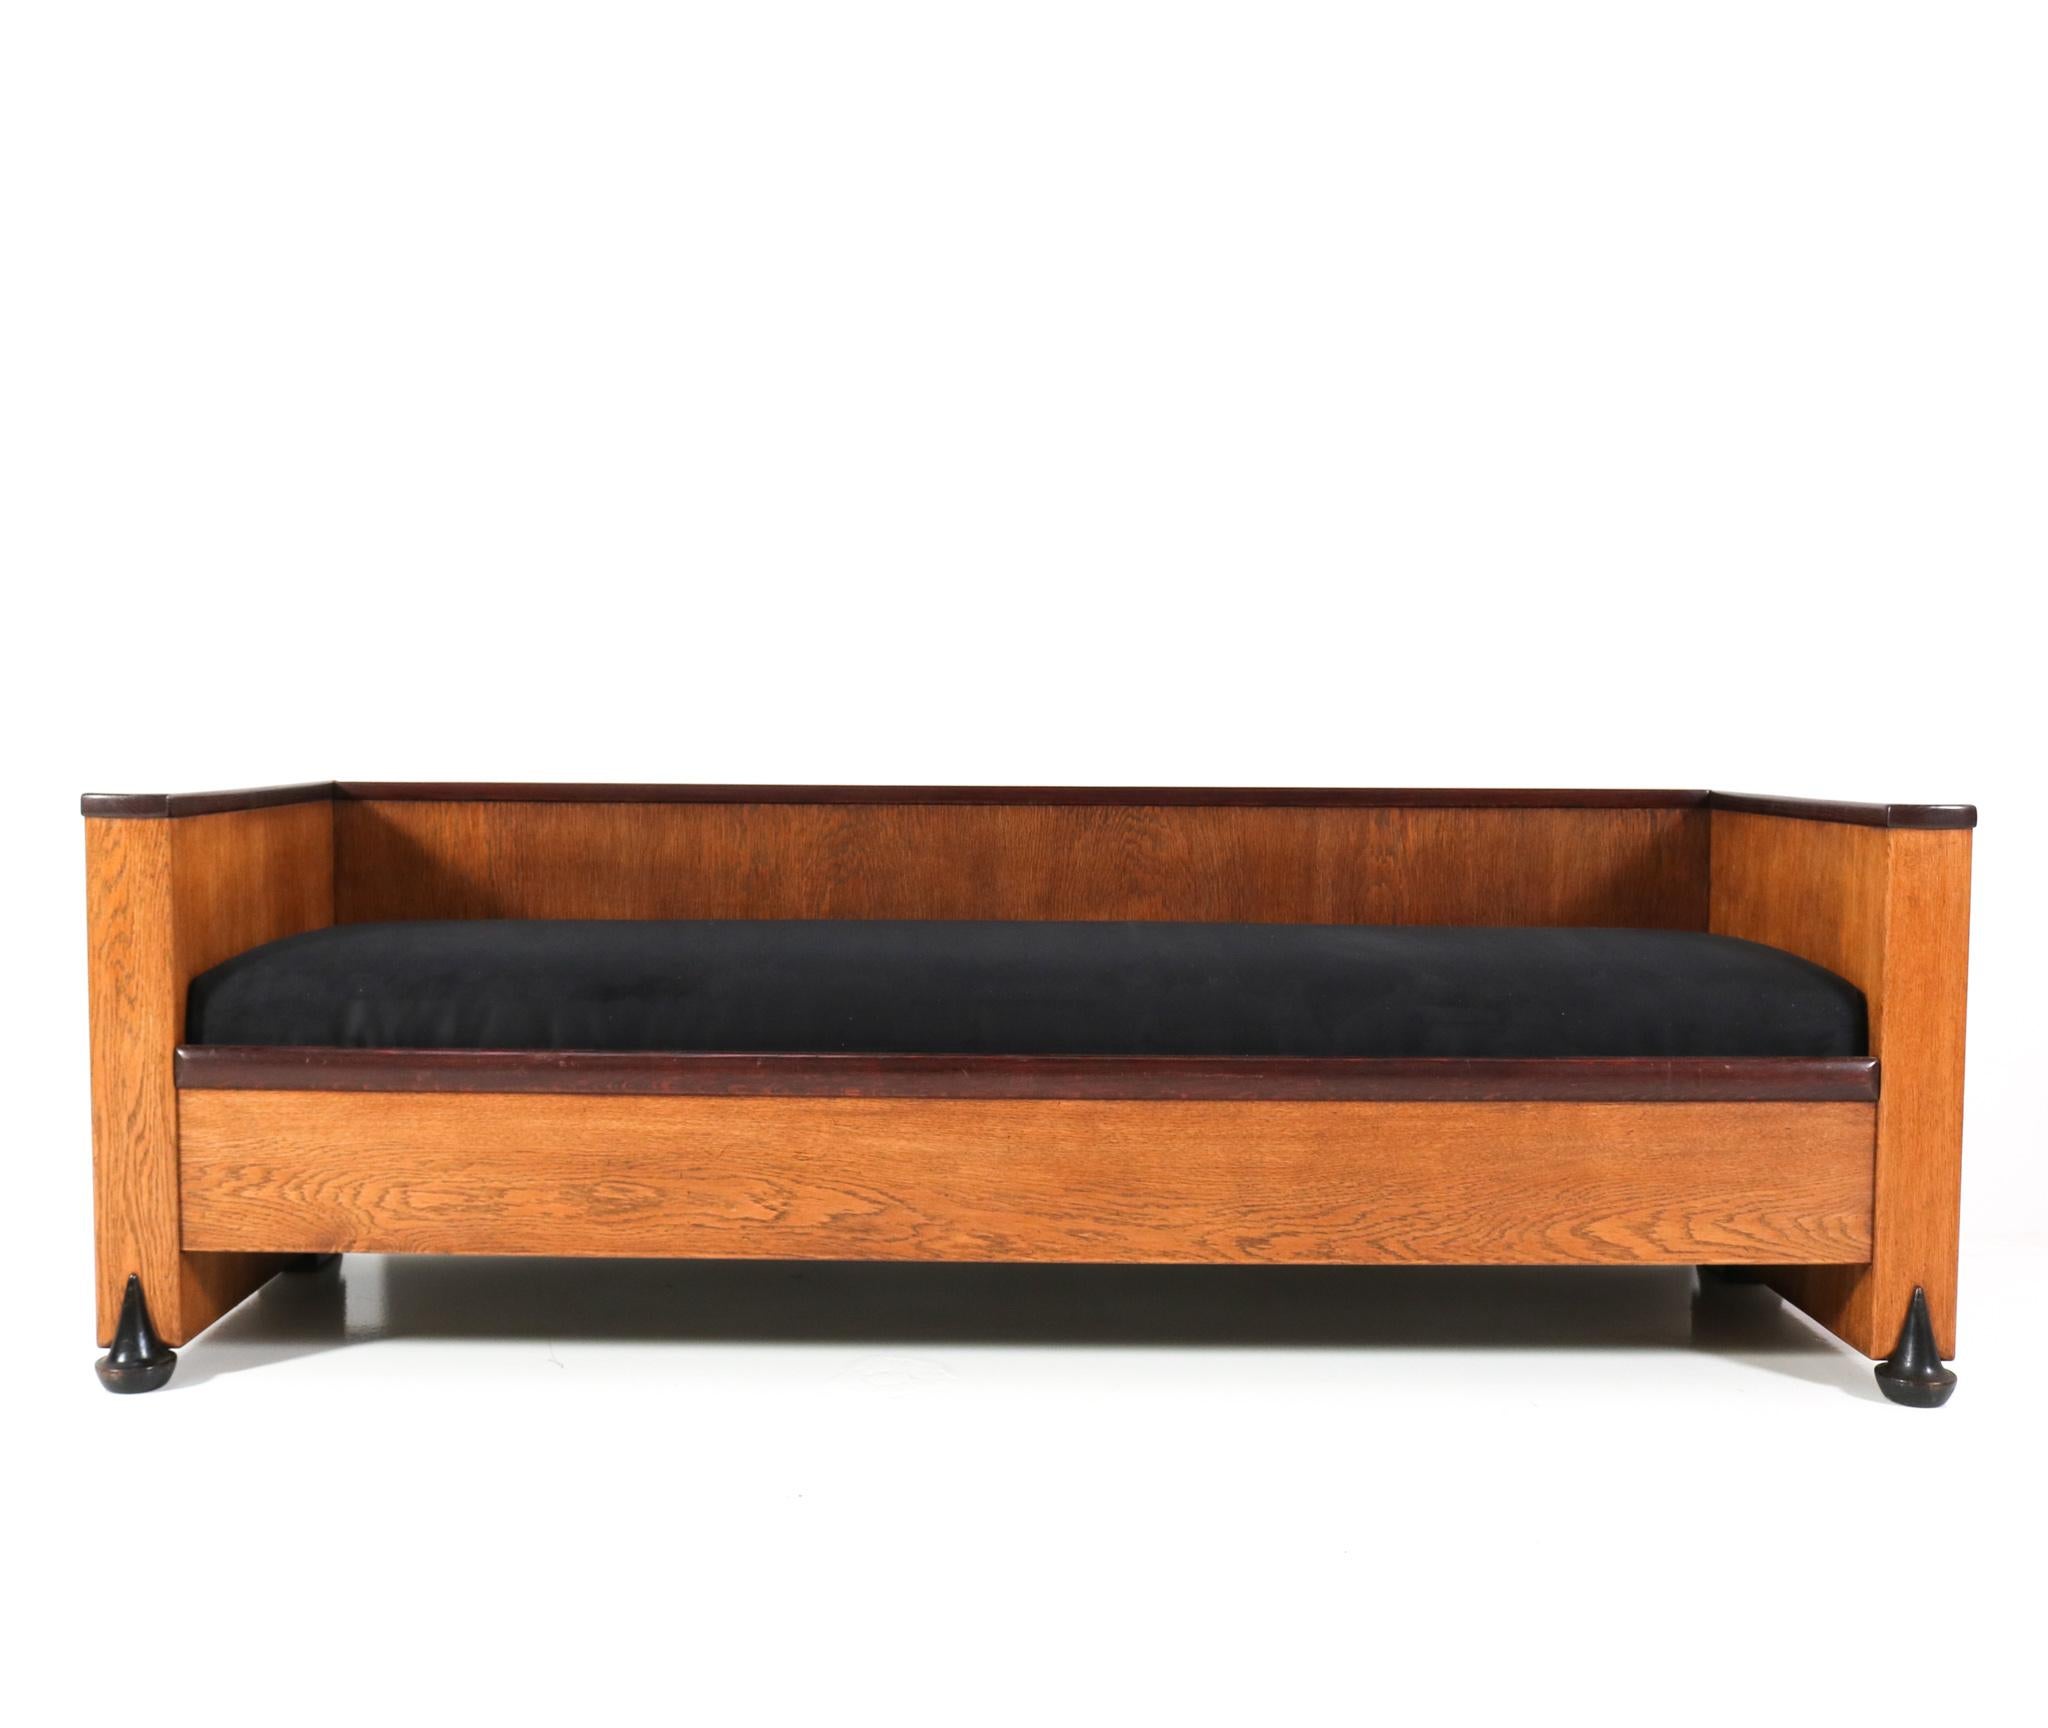 Stunning and very rare Art Deco Amsterdamse School bench or sofa.
Design attributed to Piet Kramer.
Striking Dutch design from the 1920s.
Solid oak with original oak veneer frame with original black lacquered details
at the feet.
The seat is